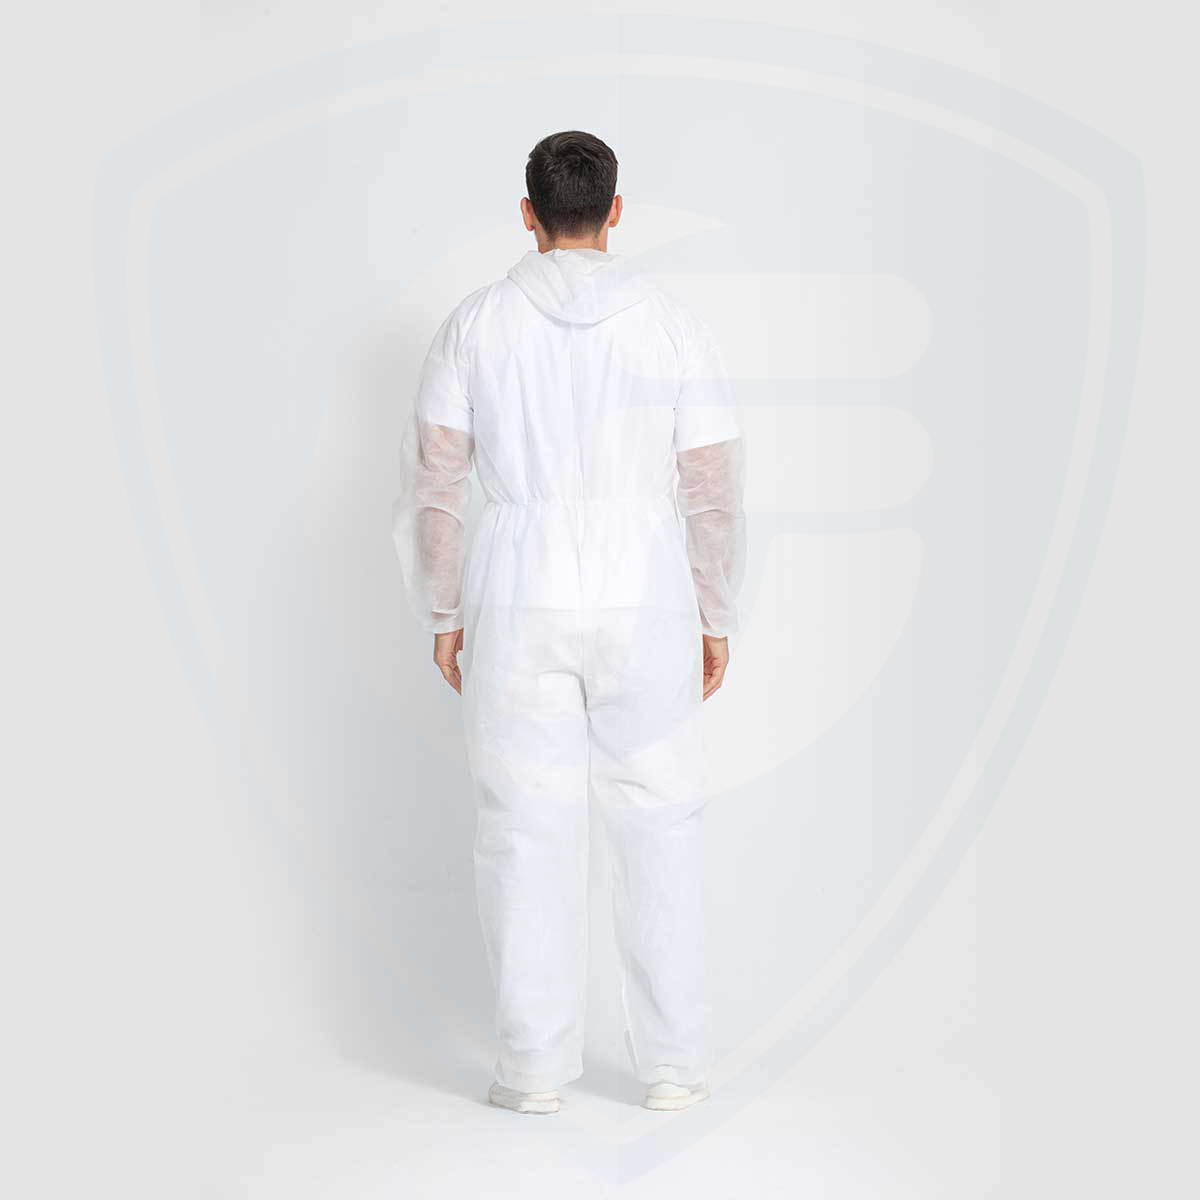 Disposable Overall Suit Breathable Polypropylene Nonwoven Protective Clothing White